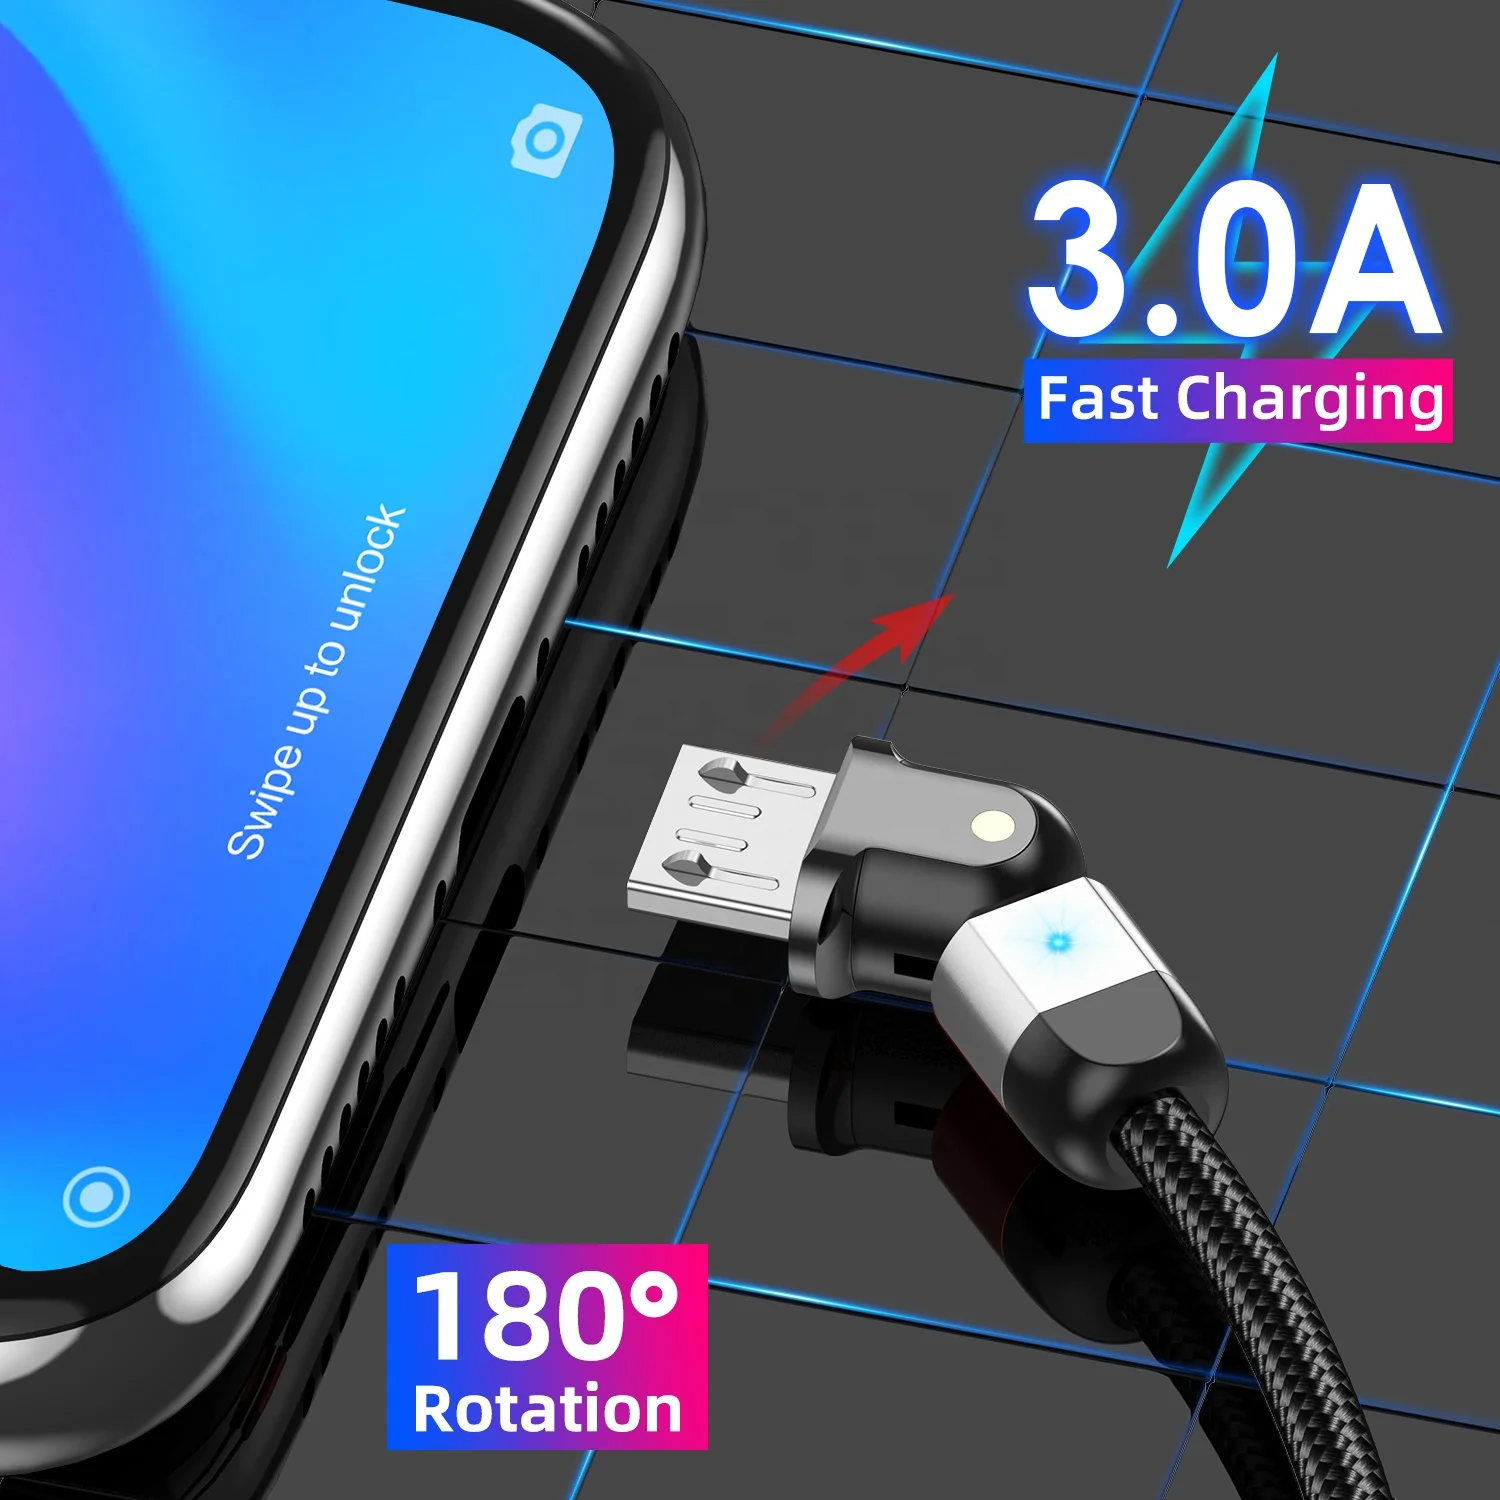 

USLION Cheap price 3A fast charging USB data cable 180 degree L shape straight dual use cell phone accessories cable, Black, red,silver,purple